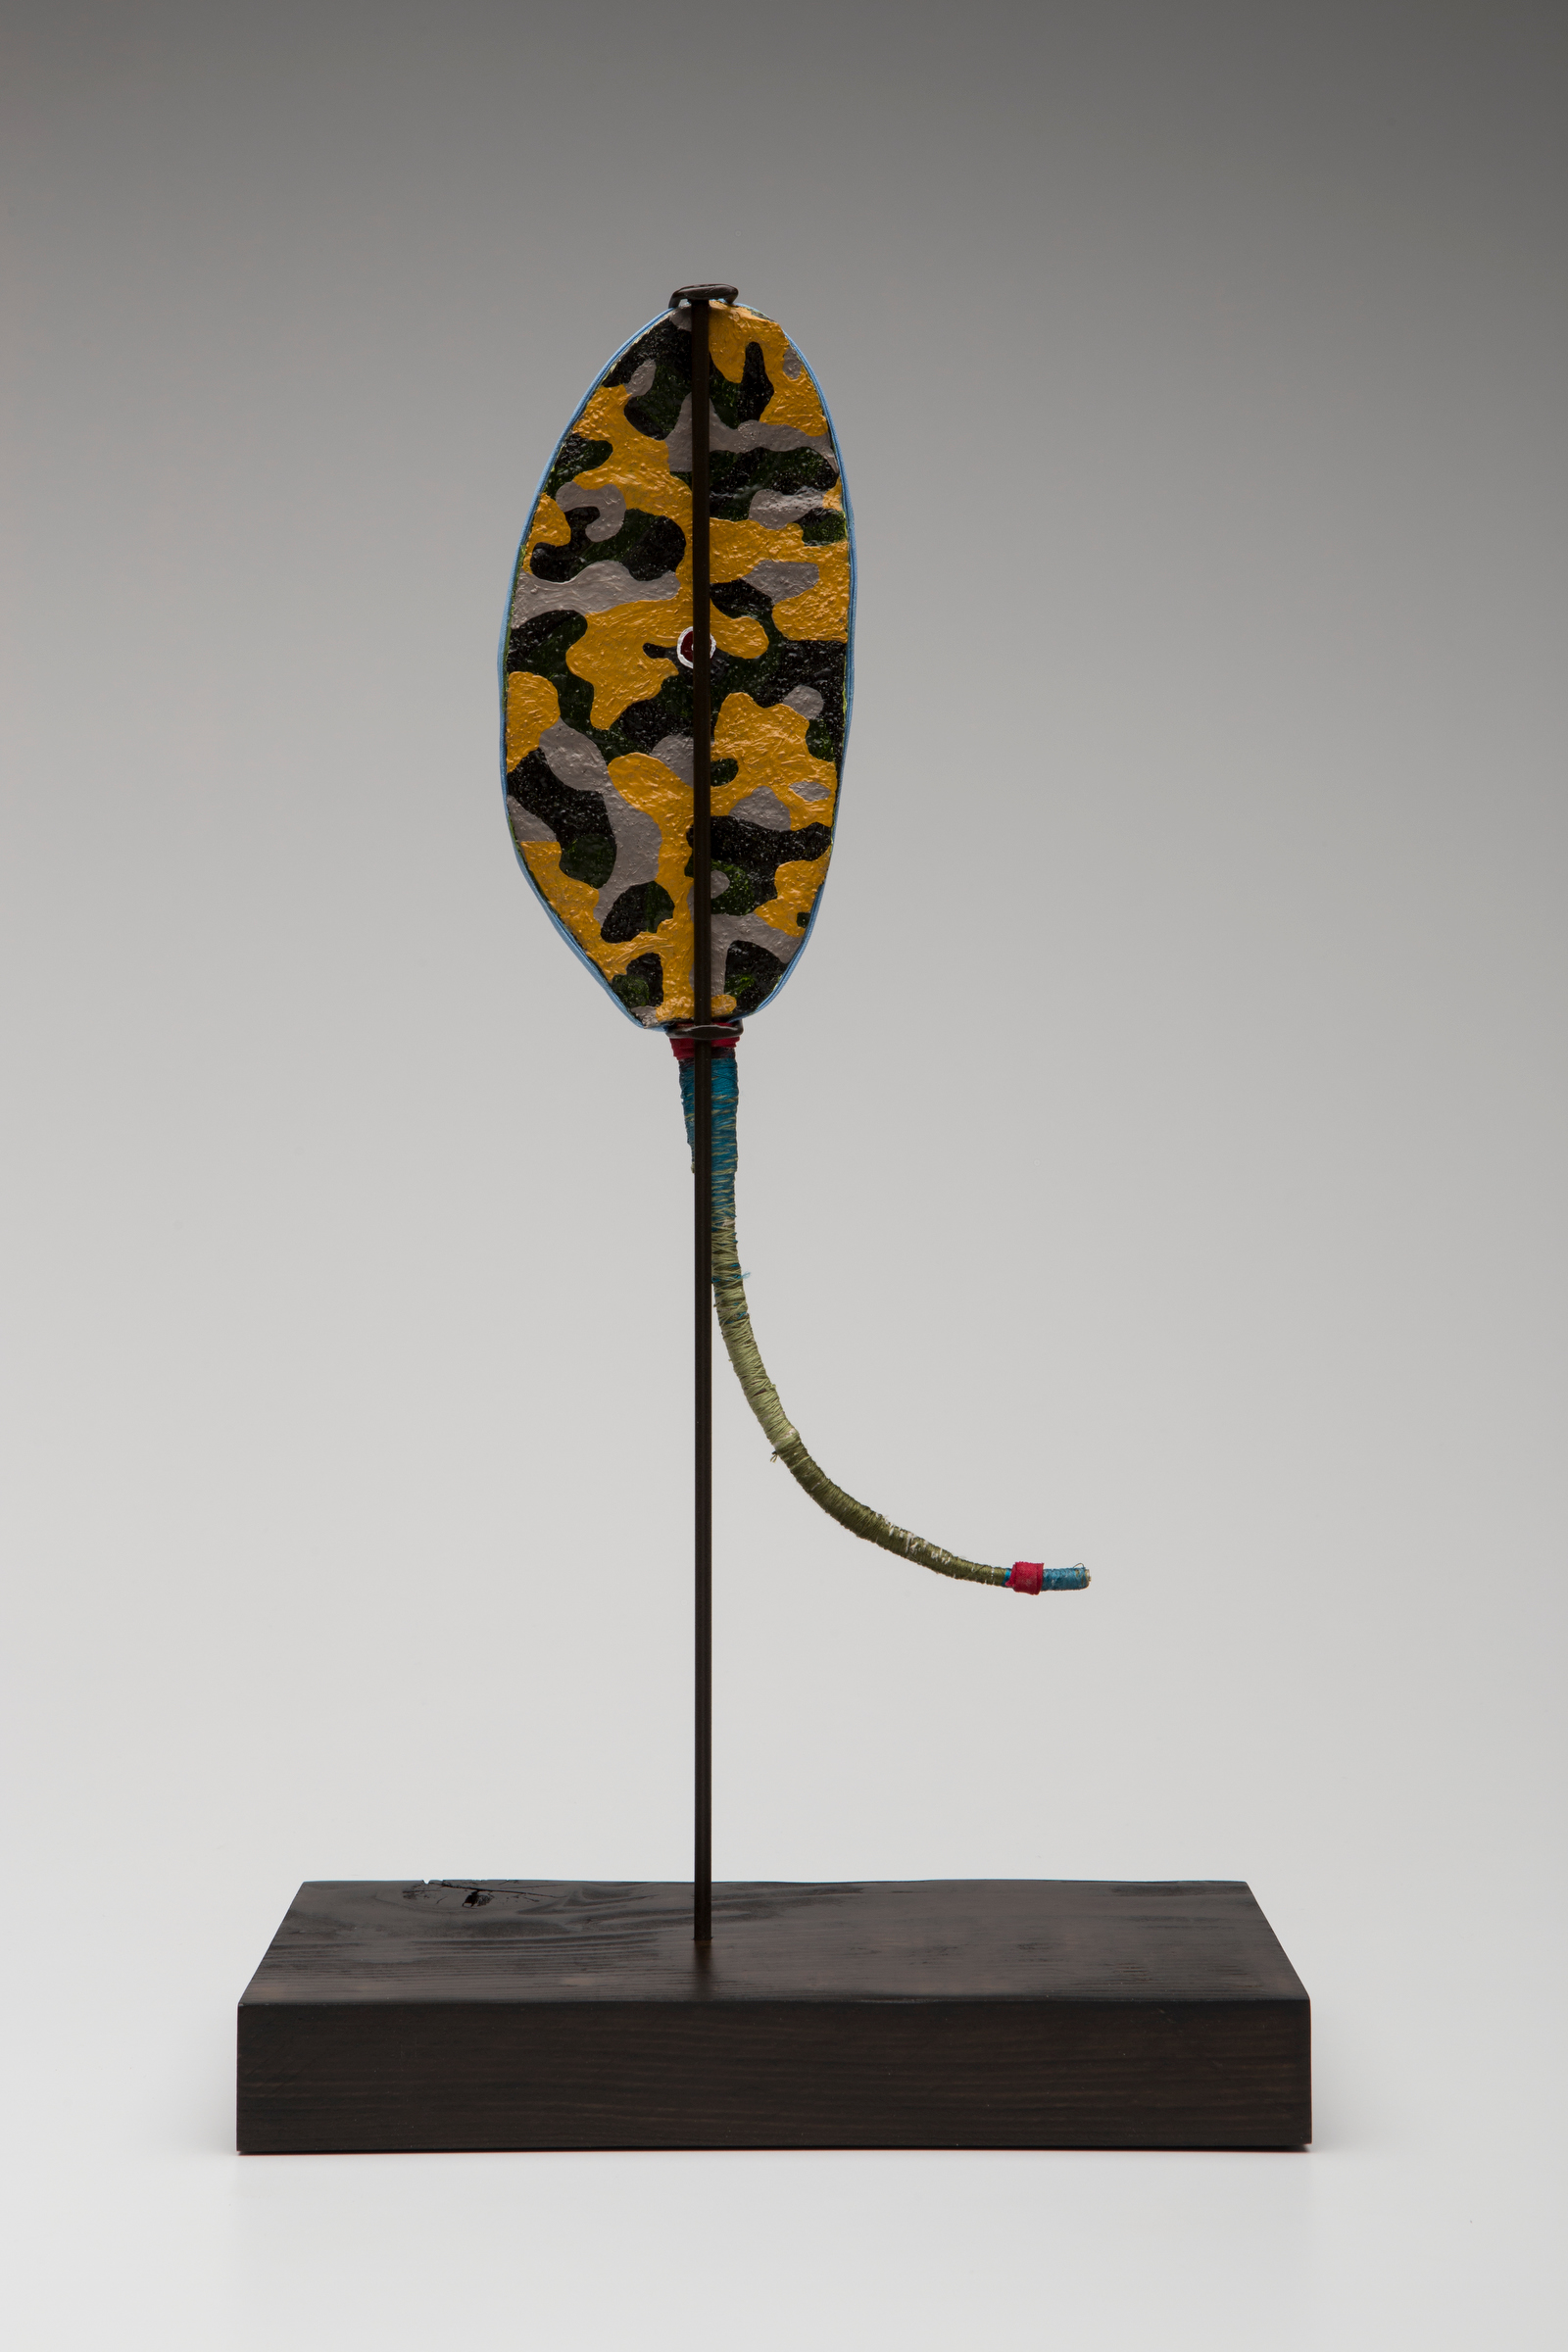   Prayer Paddle: To Treat All People With Dignity (back view) , mixed media, 14 by 7 inches, 2007-2014. 